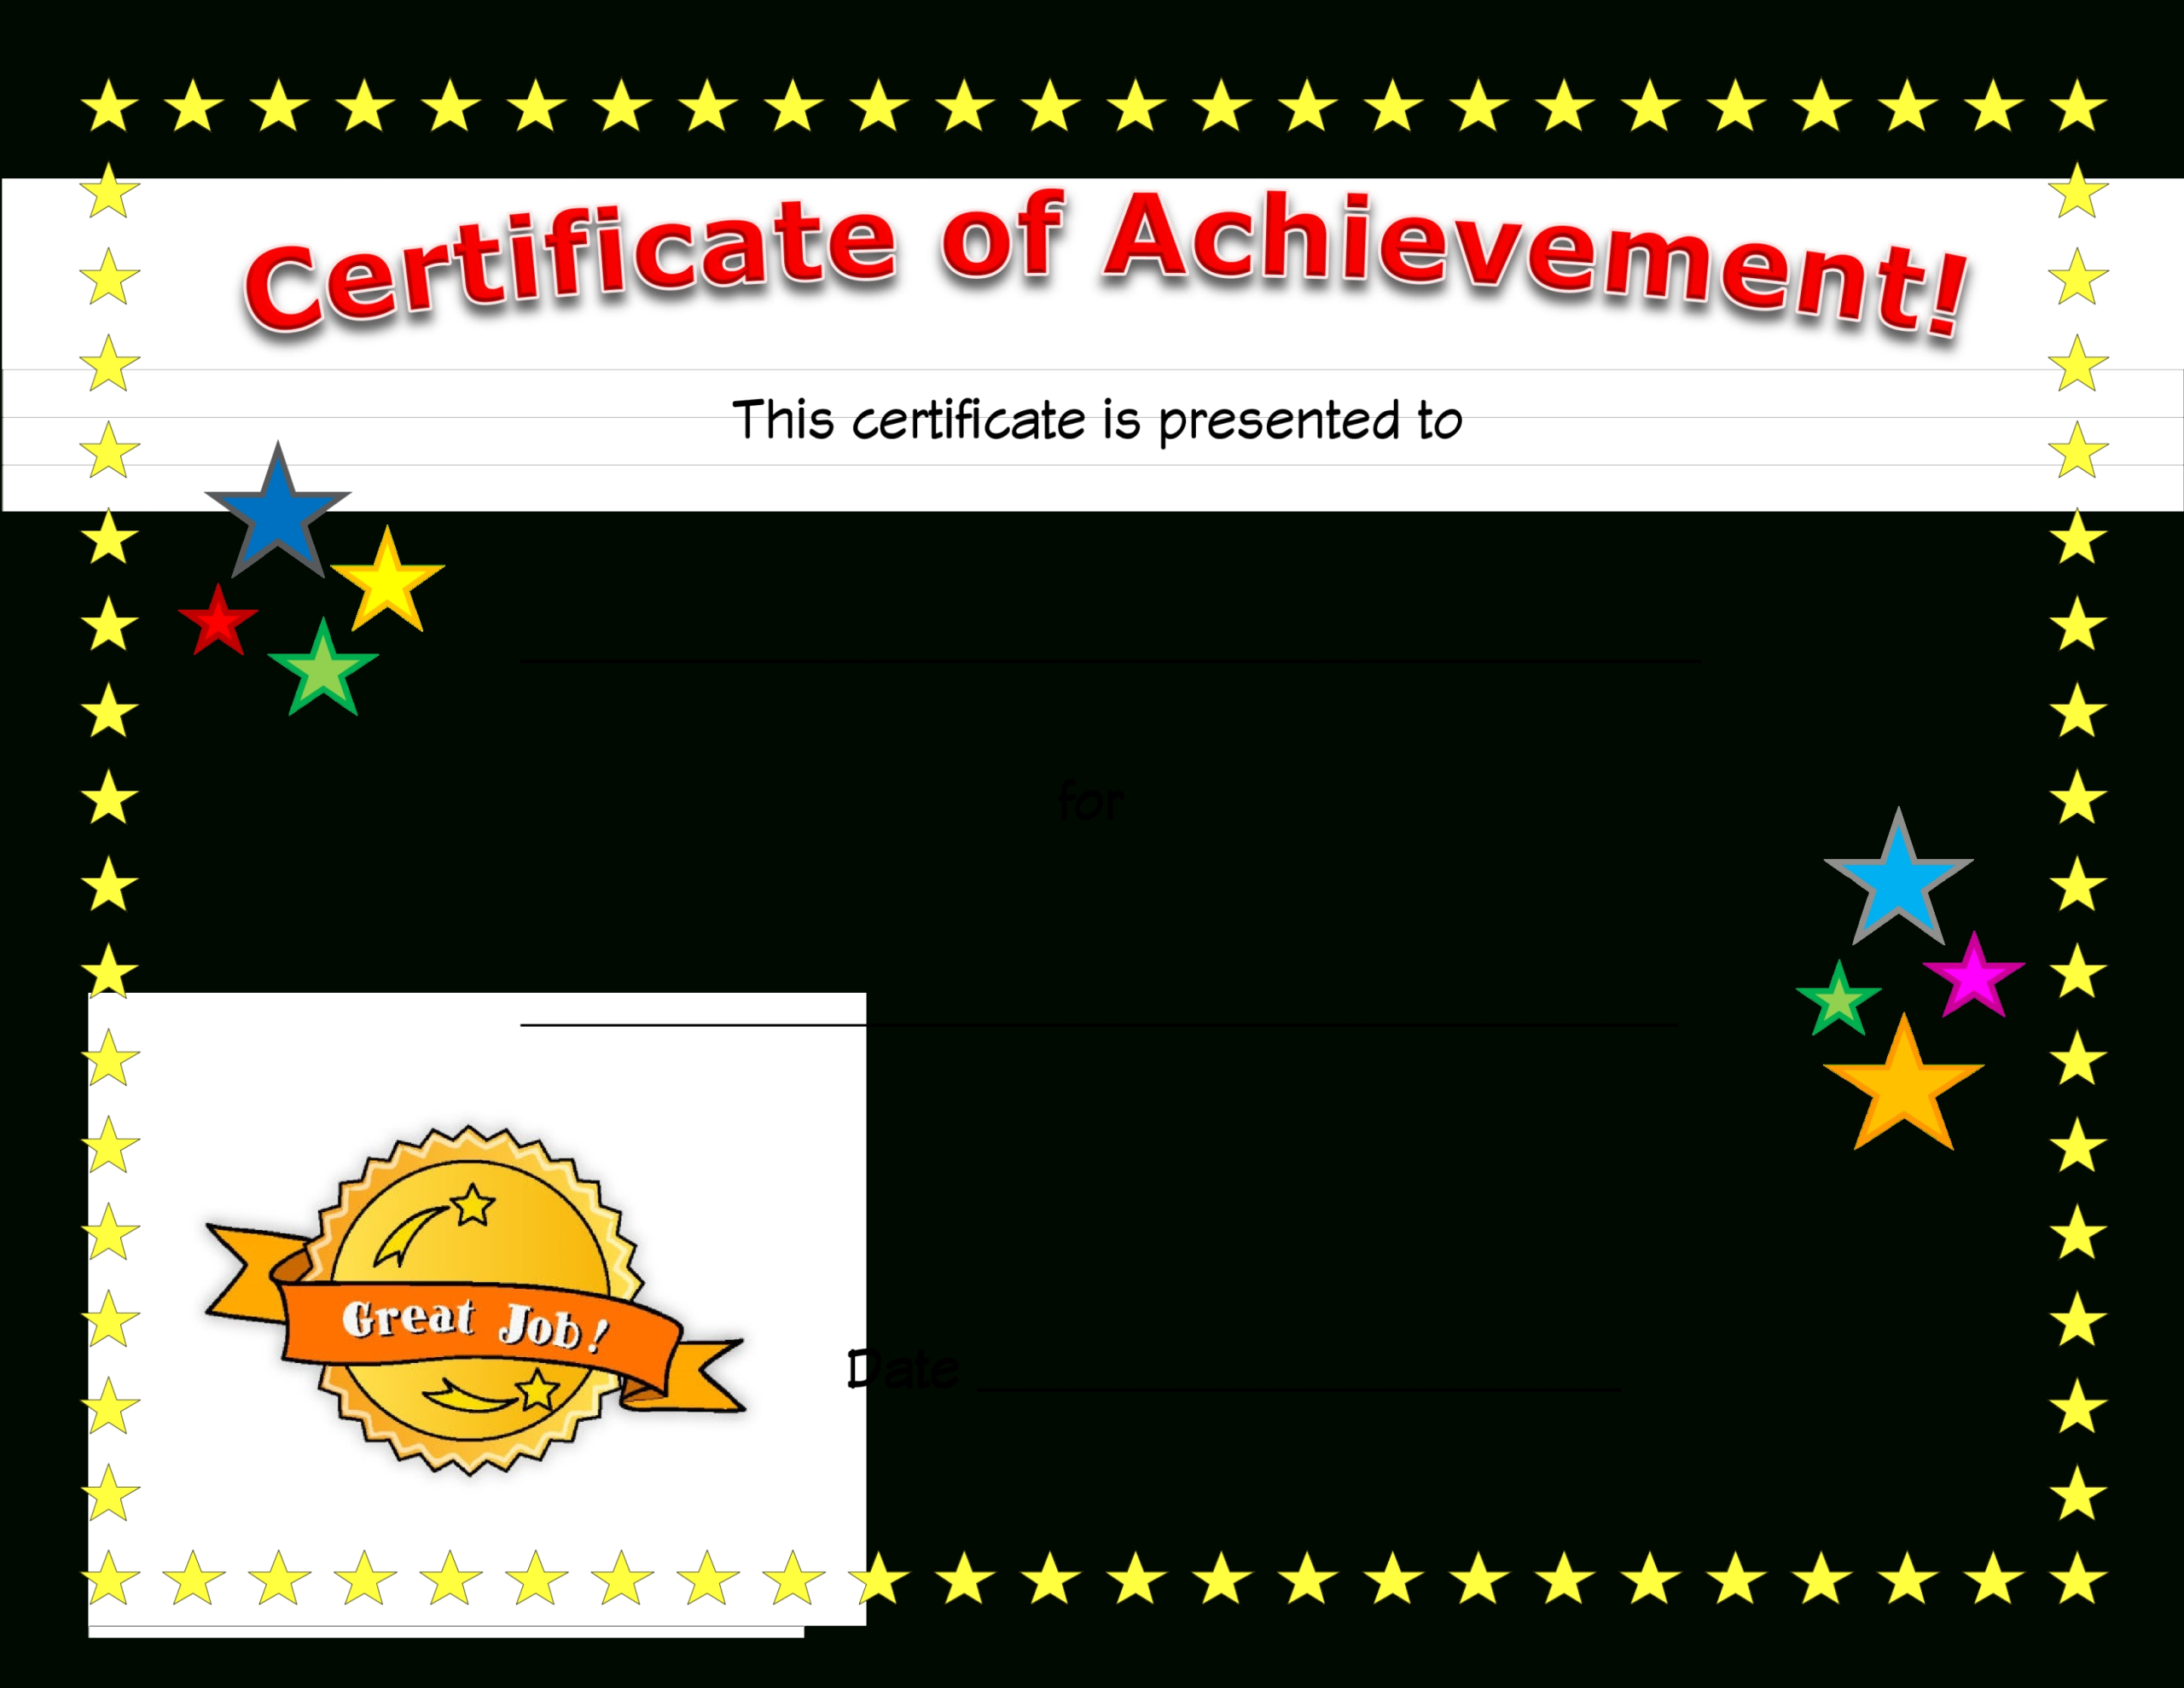 Blank Certificate Of Achievement | Templates At Allbusinesstemplates throughout Student Of The Year Award Certificate Templates